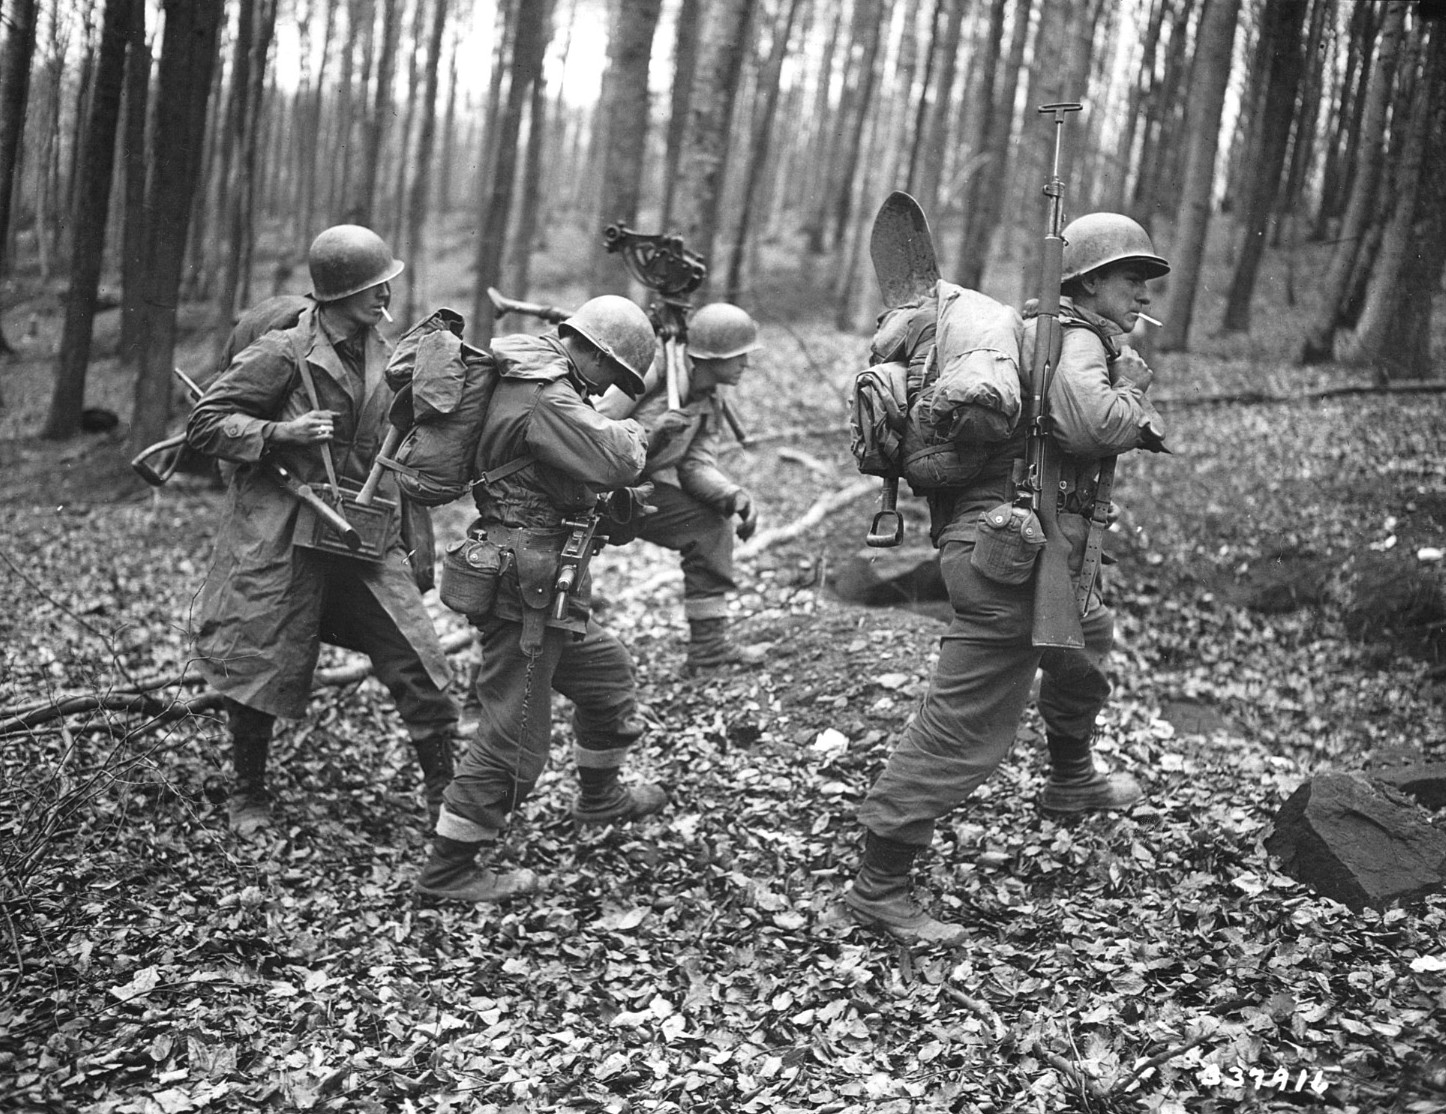 Men of the 100th Infantry Division penetrate the long-dormant Maginot Line at Bitche, in eastern France, en route to Germany.